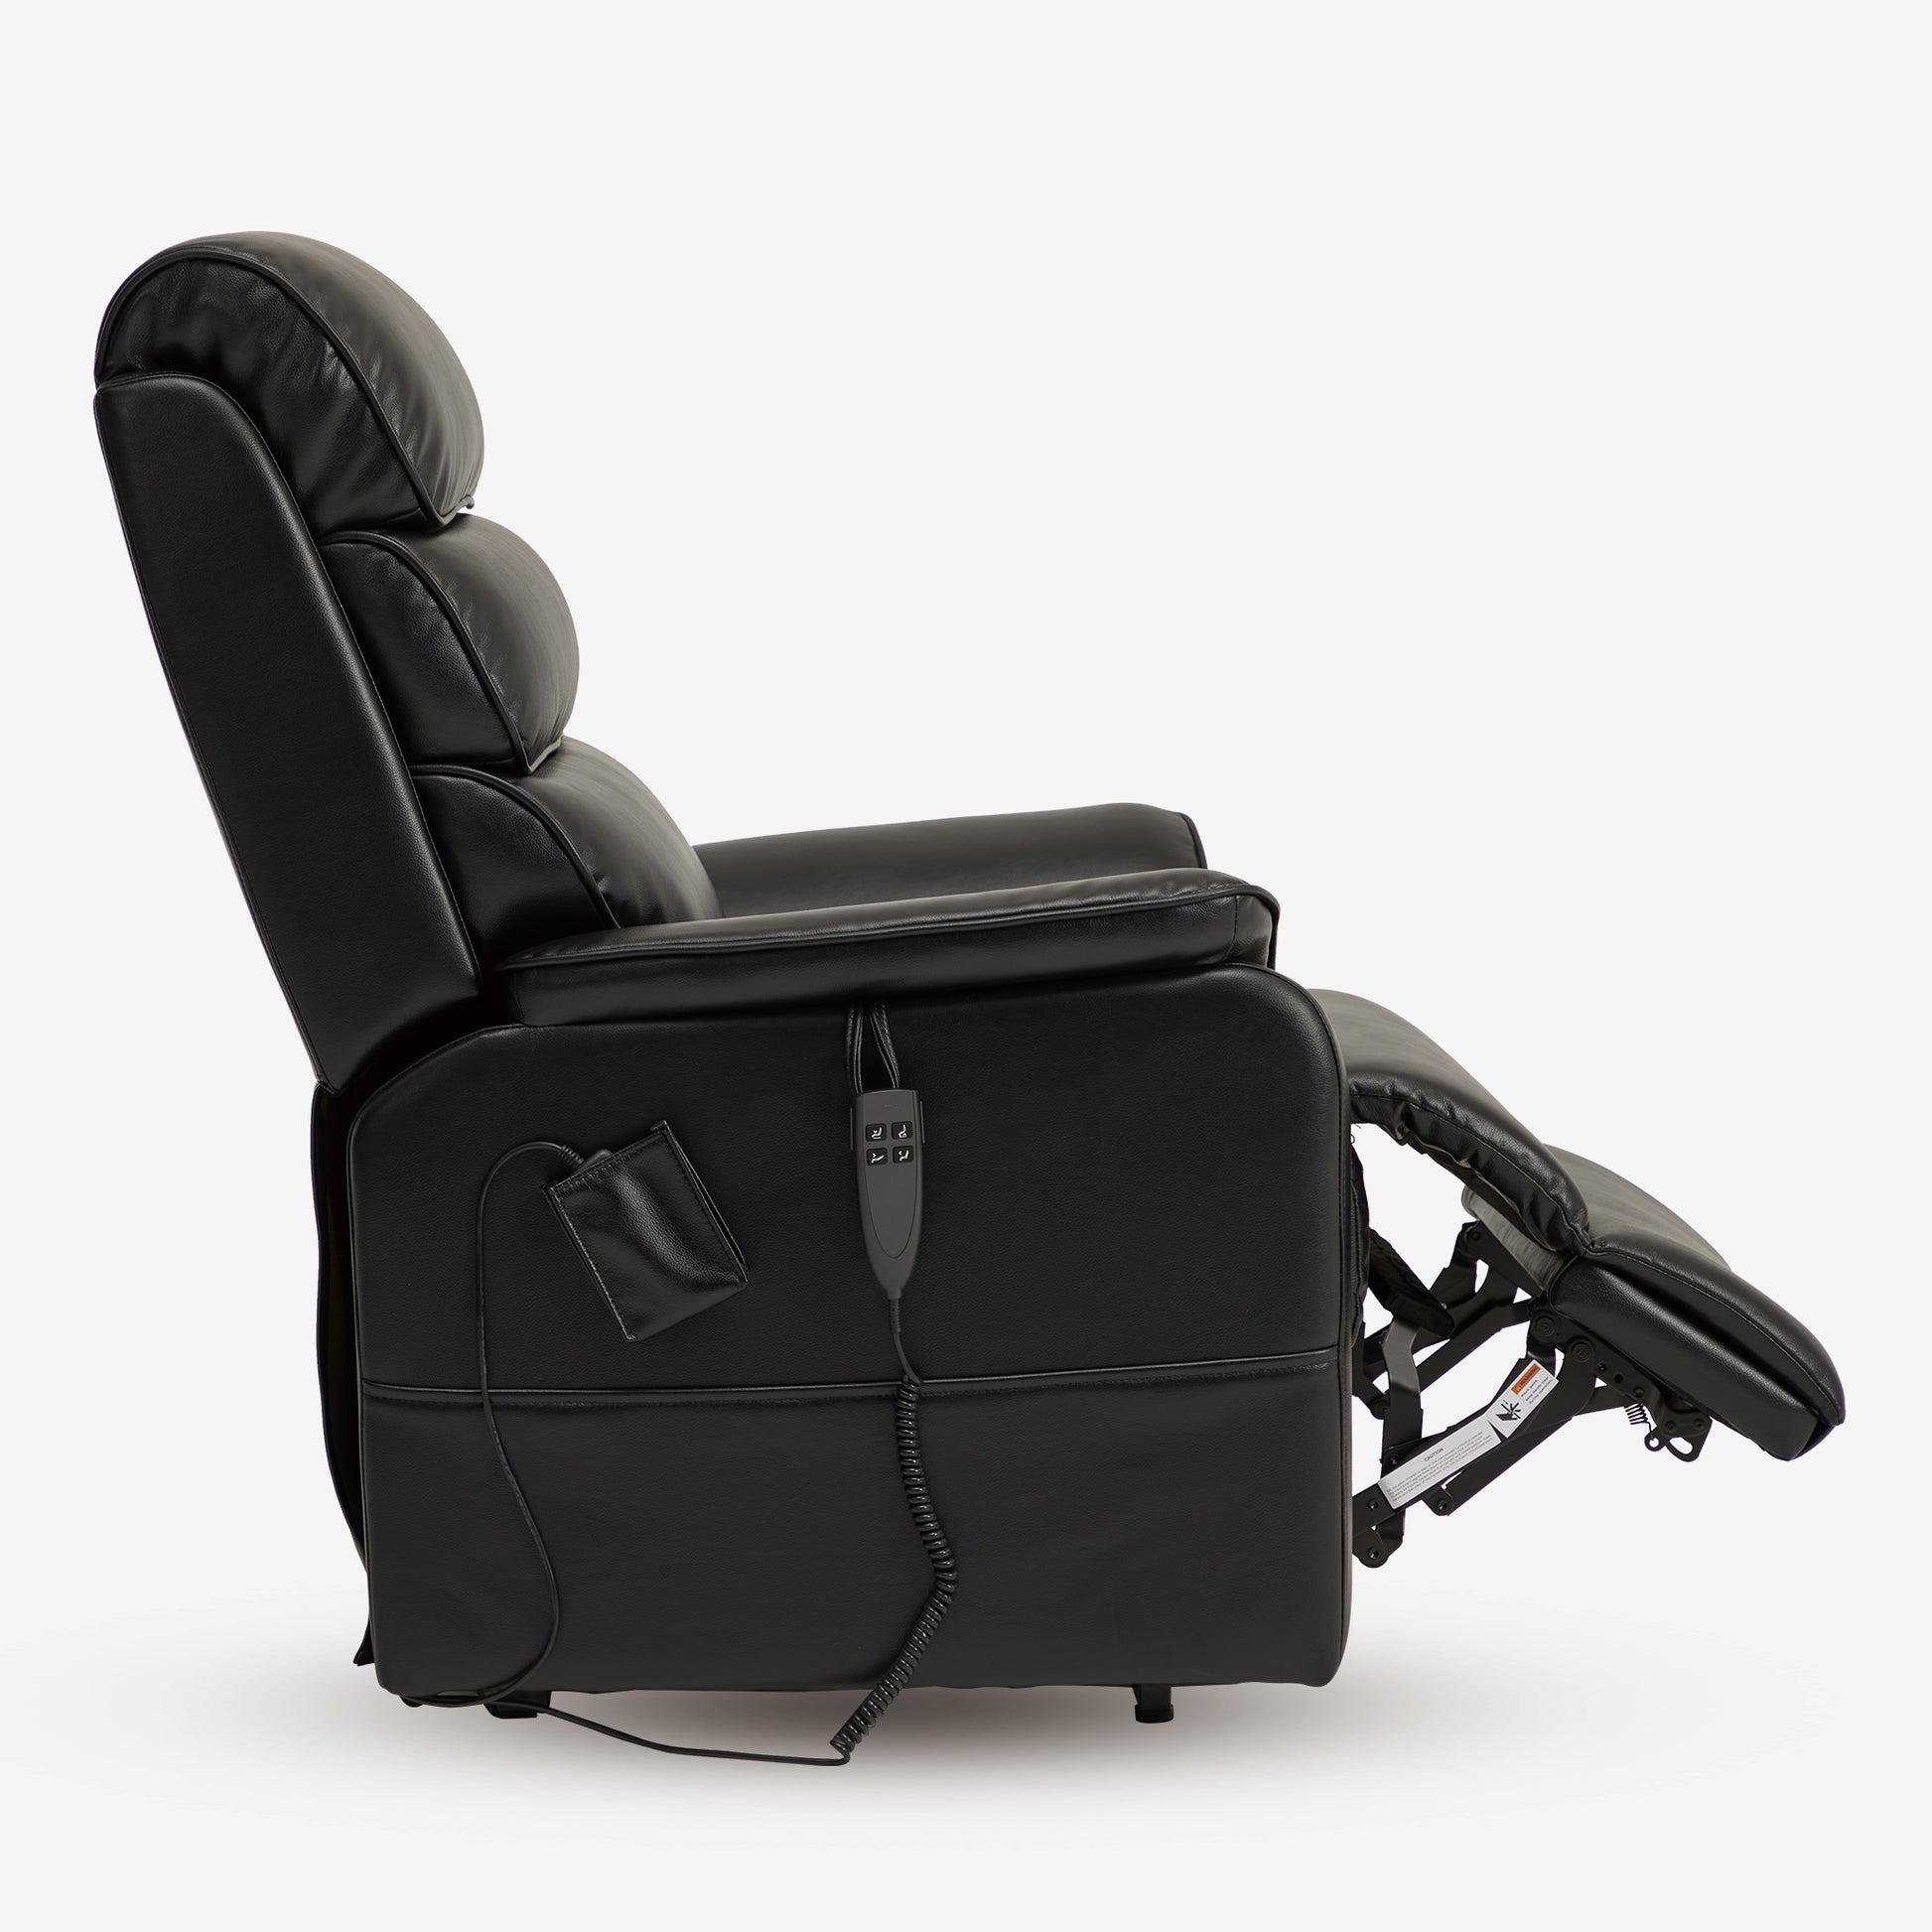 Lay Flat Lift Chair Recliner With Heat&massage And Infinite Positons